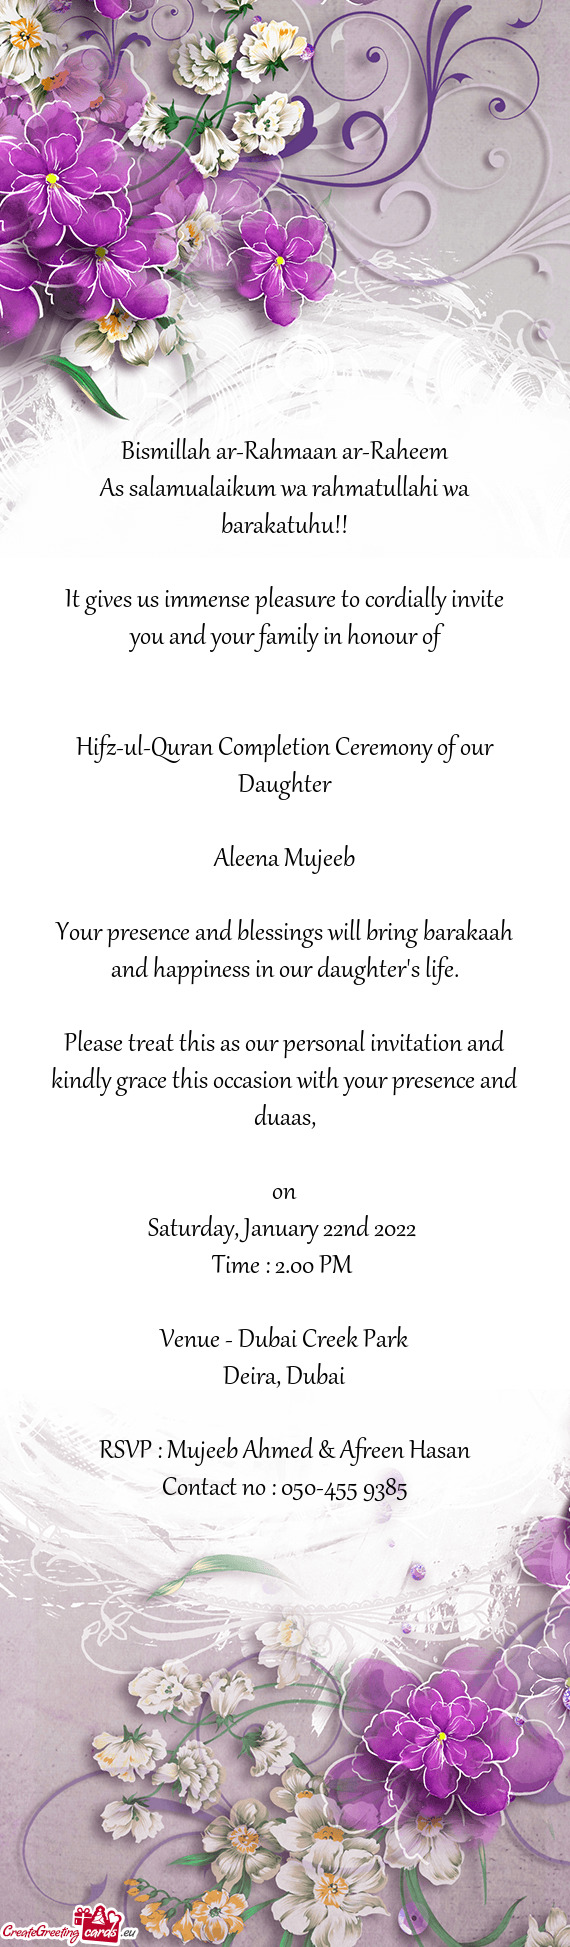 Please treat this as our personal invitation and kindly grace this occasion with your presence and d